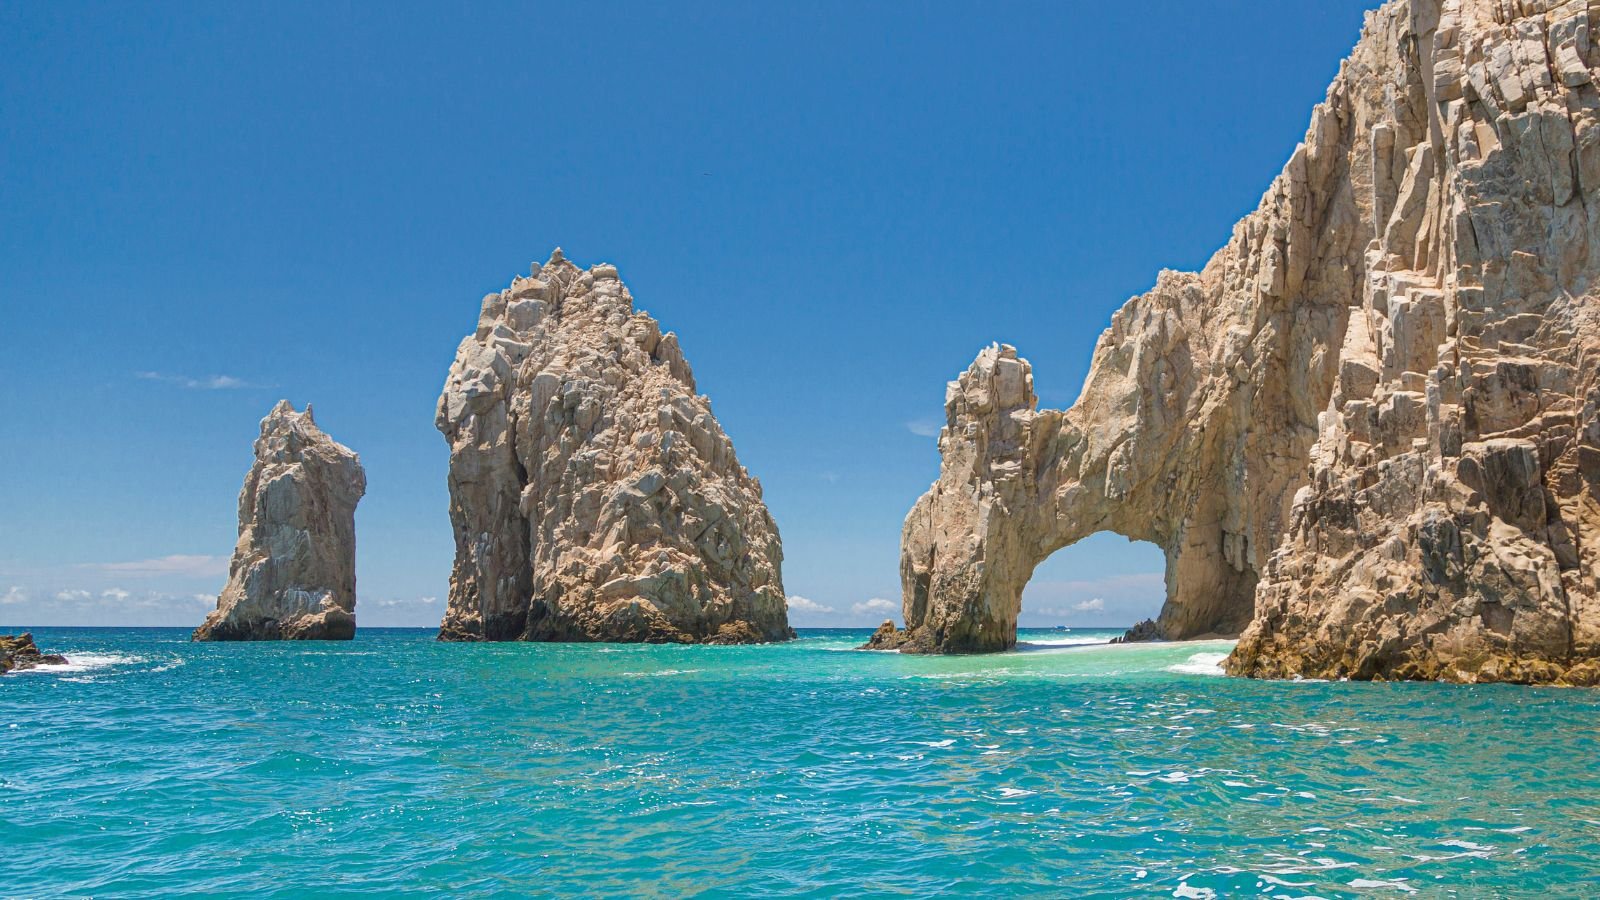 <p>Los Cabos, comprising Cabo San Lucas and San Jose del Cabo, offers expats a blend of desert and coastal living. Located at the tip of the Baja California peninsula, it is known for safety and modern conveniences. The area has 22 beaches with some Blue Flag recognition. Los Cabos provides world-class medical facilities, family resorts, and a thriving social scene. The UNESCO-protected <a href="https://www.unesco.org/mab/50anniversary/en/sierra-la-laguna" rel="noopener">Sierra de la Laguna</a> Biosphere Reserve adds to its natural appeal.</p>